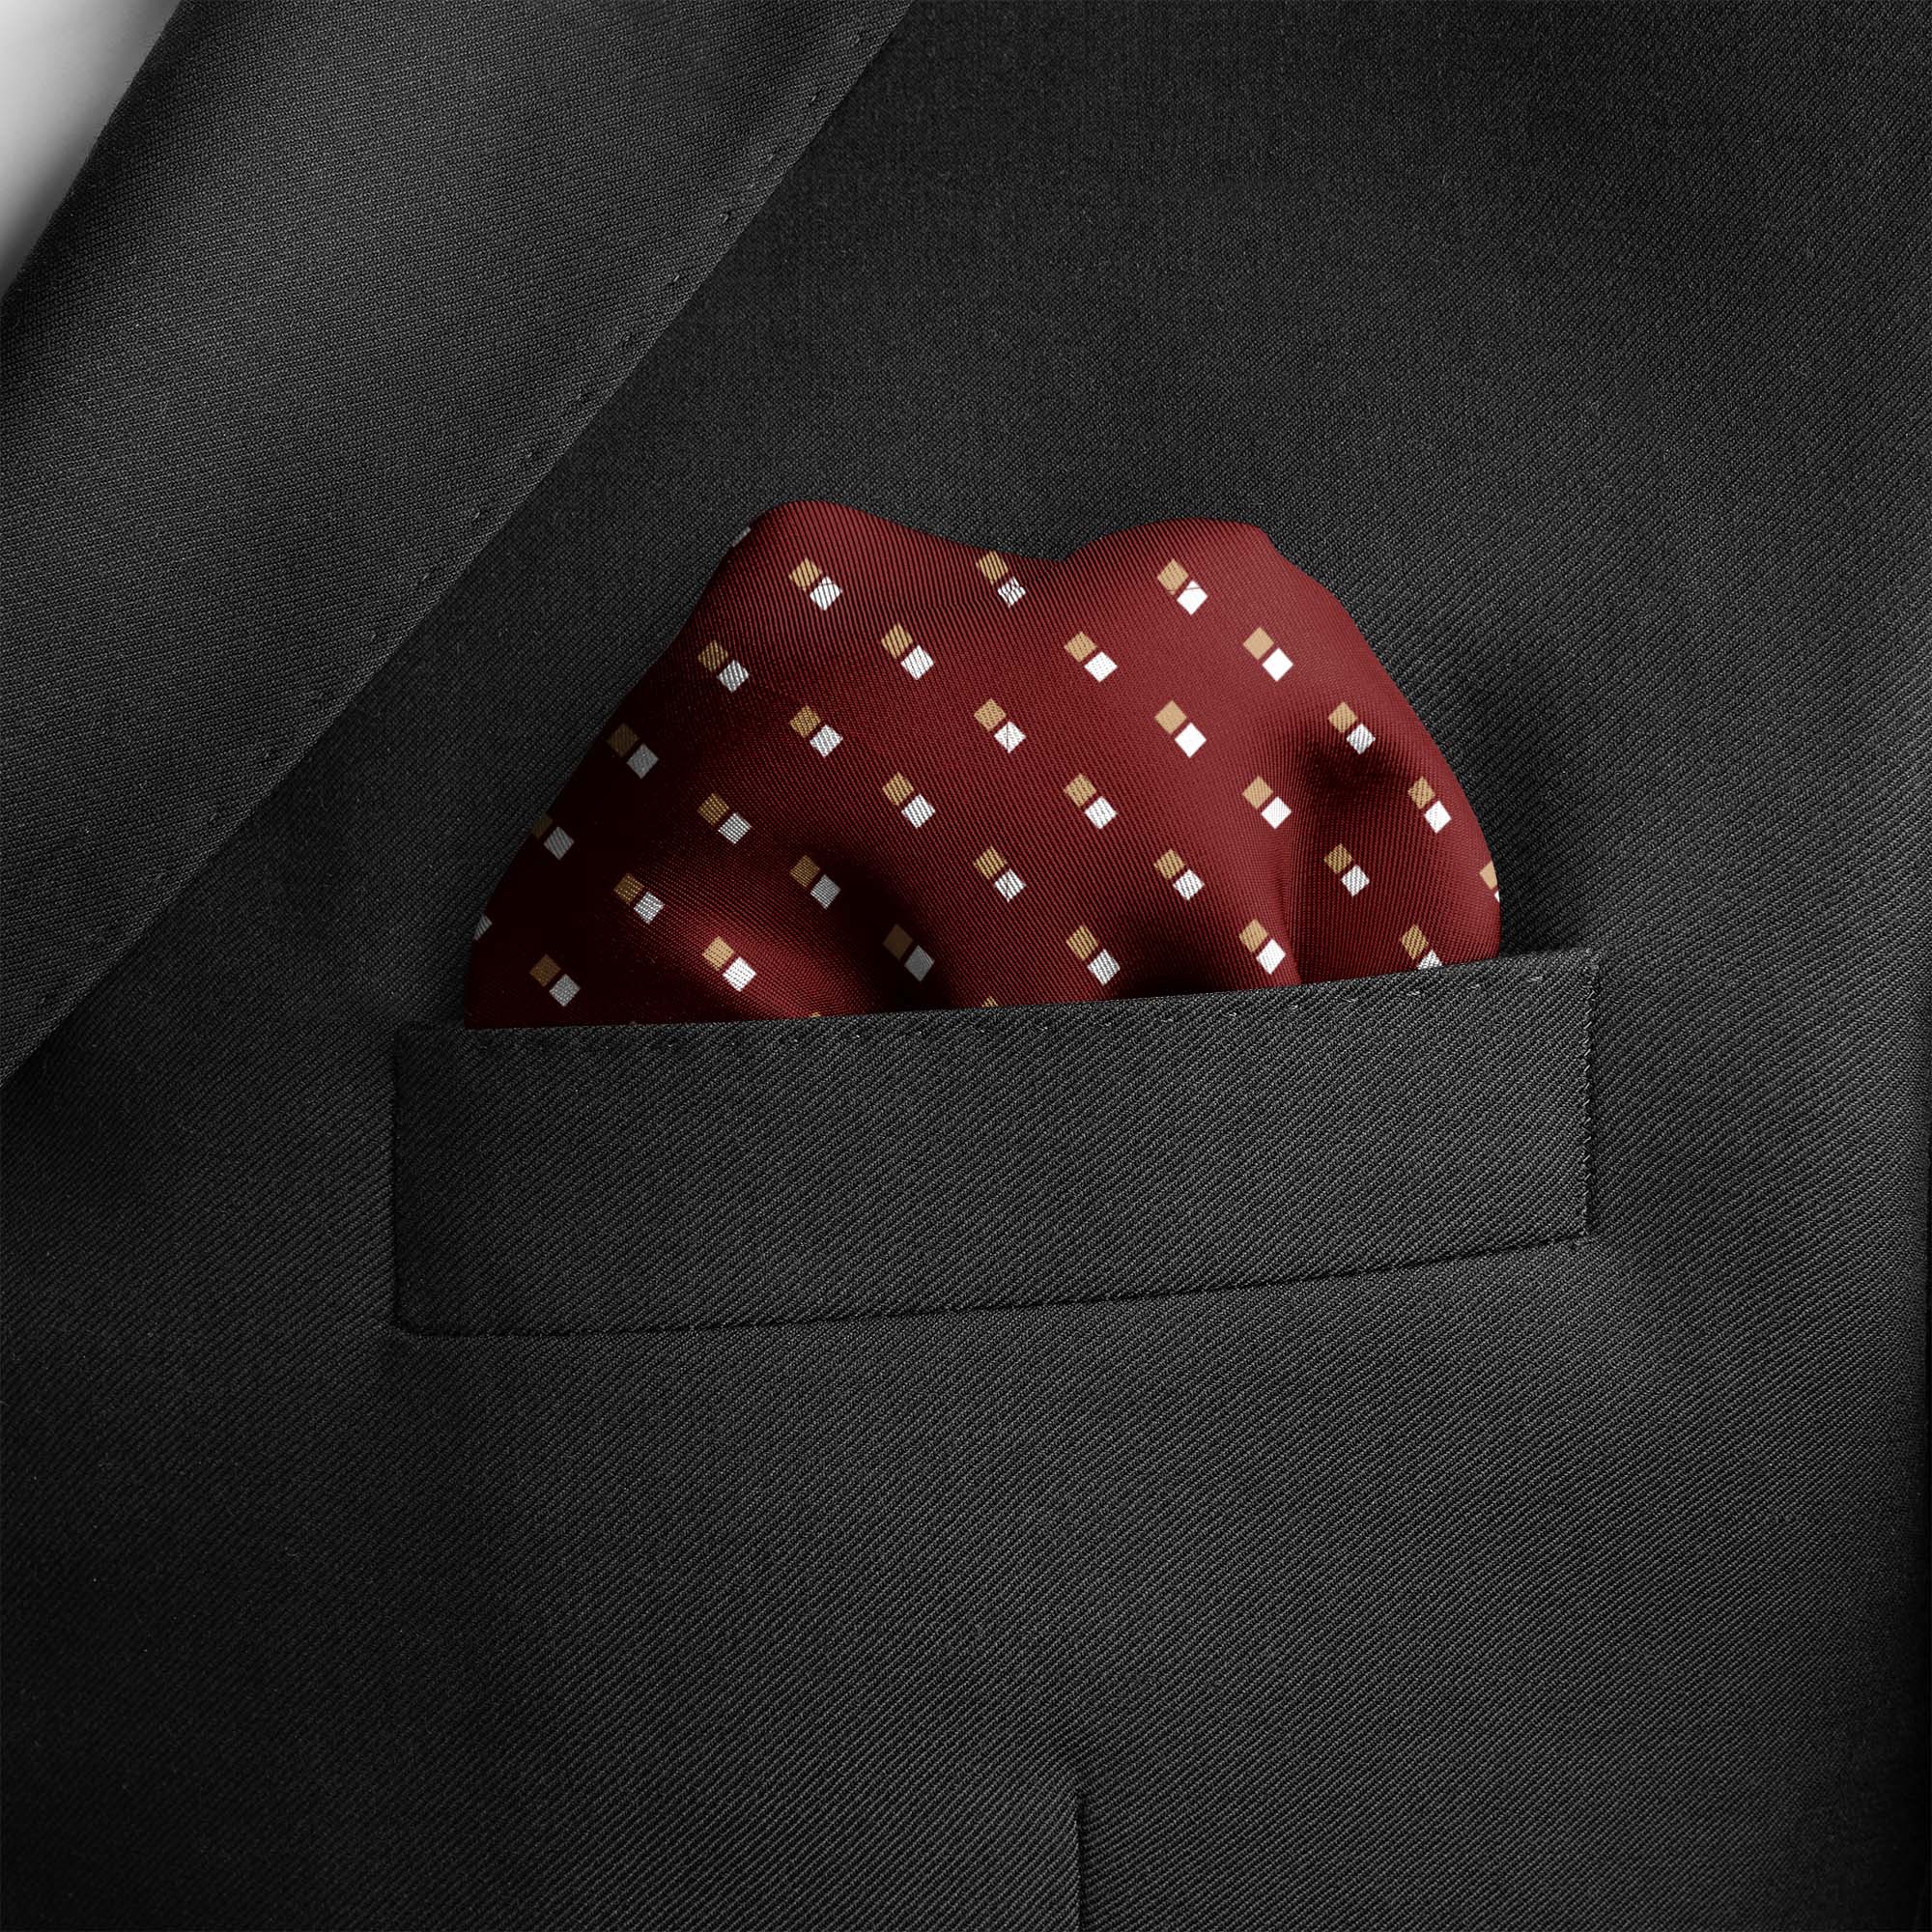 DOUBLE DOTTED MAROON SILK POCKET SQUARE